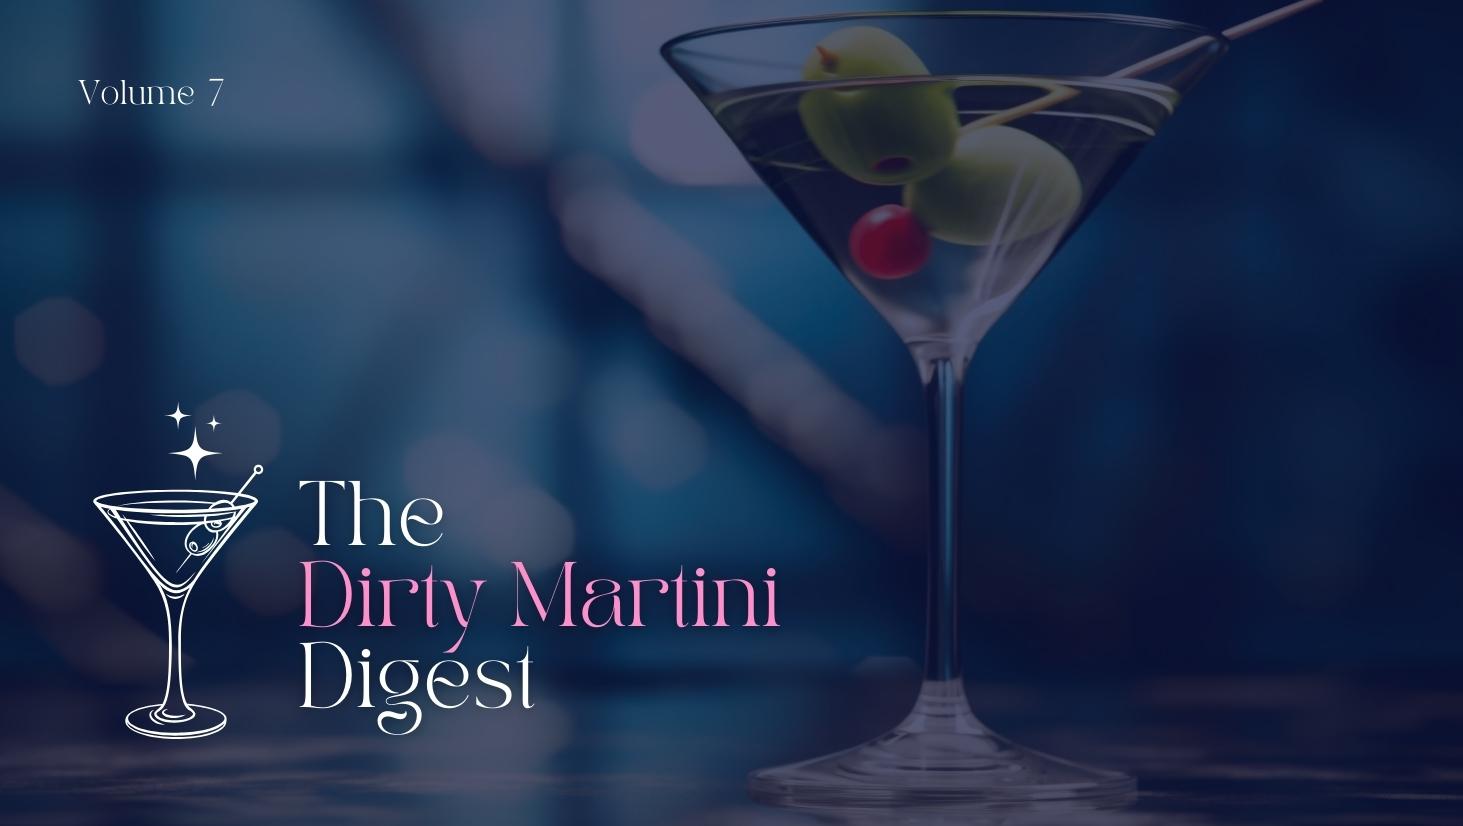 The Dirty Martini Digest volume 7